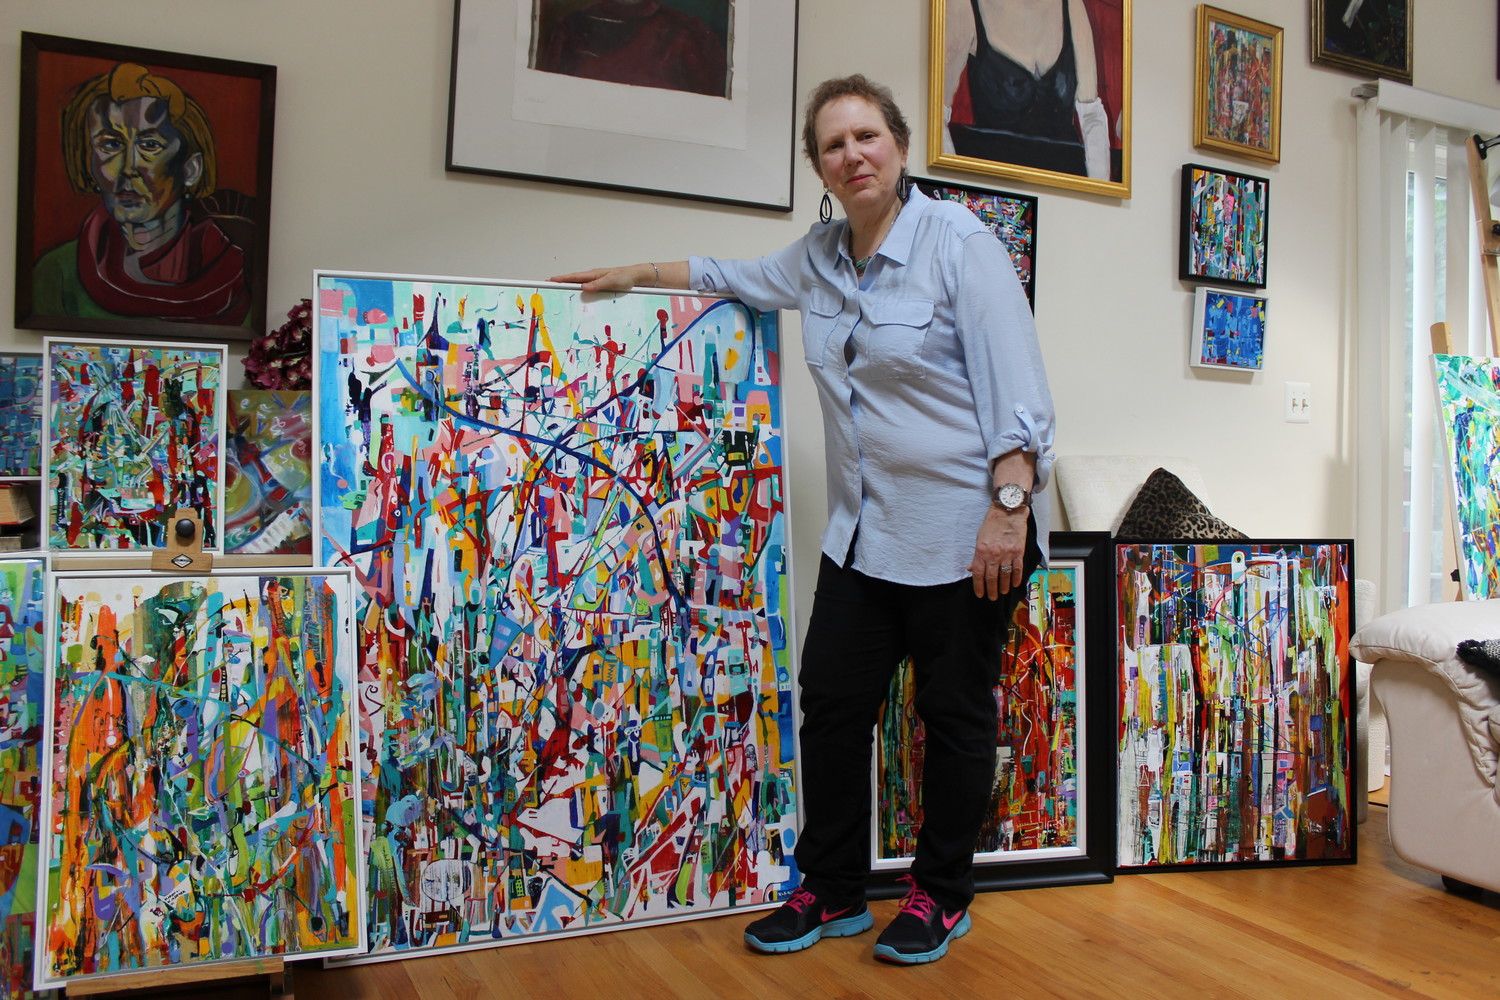 Karen Kirshner is an artist from East Meadow who specializes in abstract surrealism.